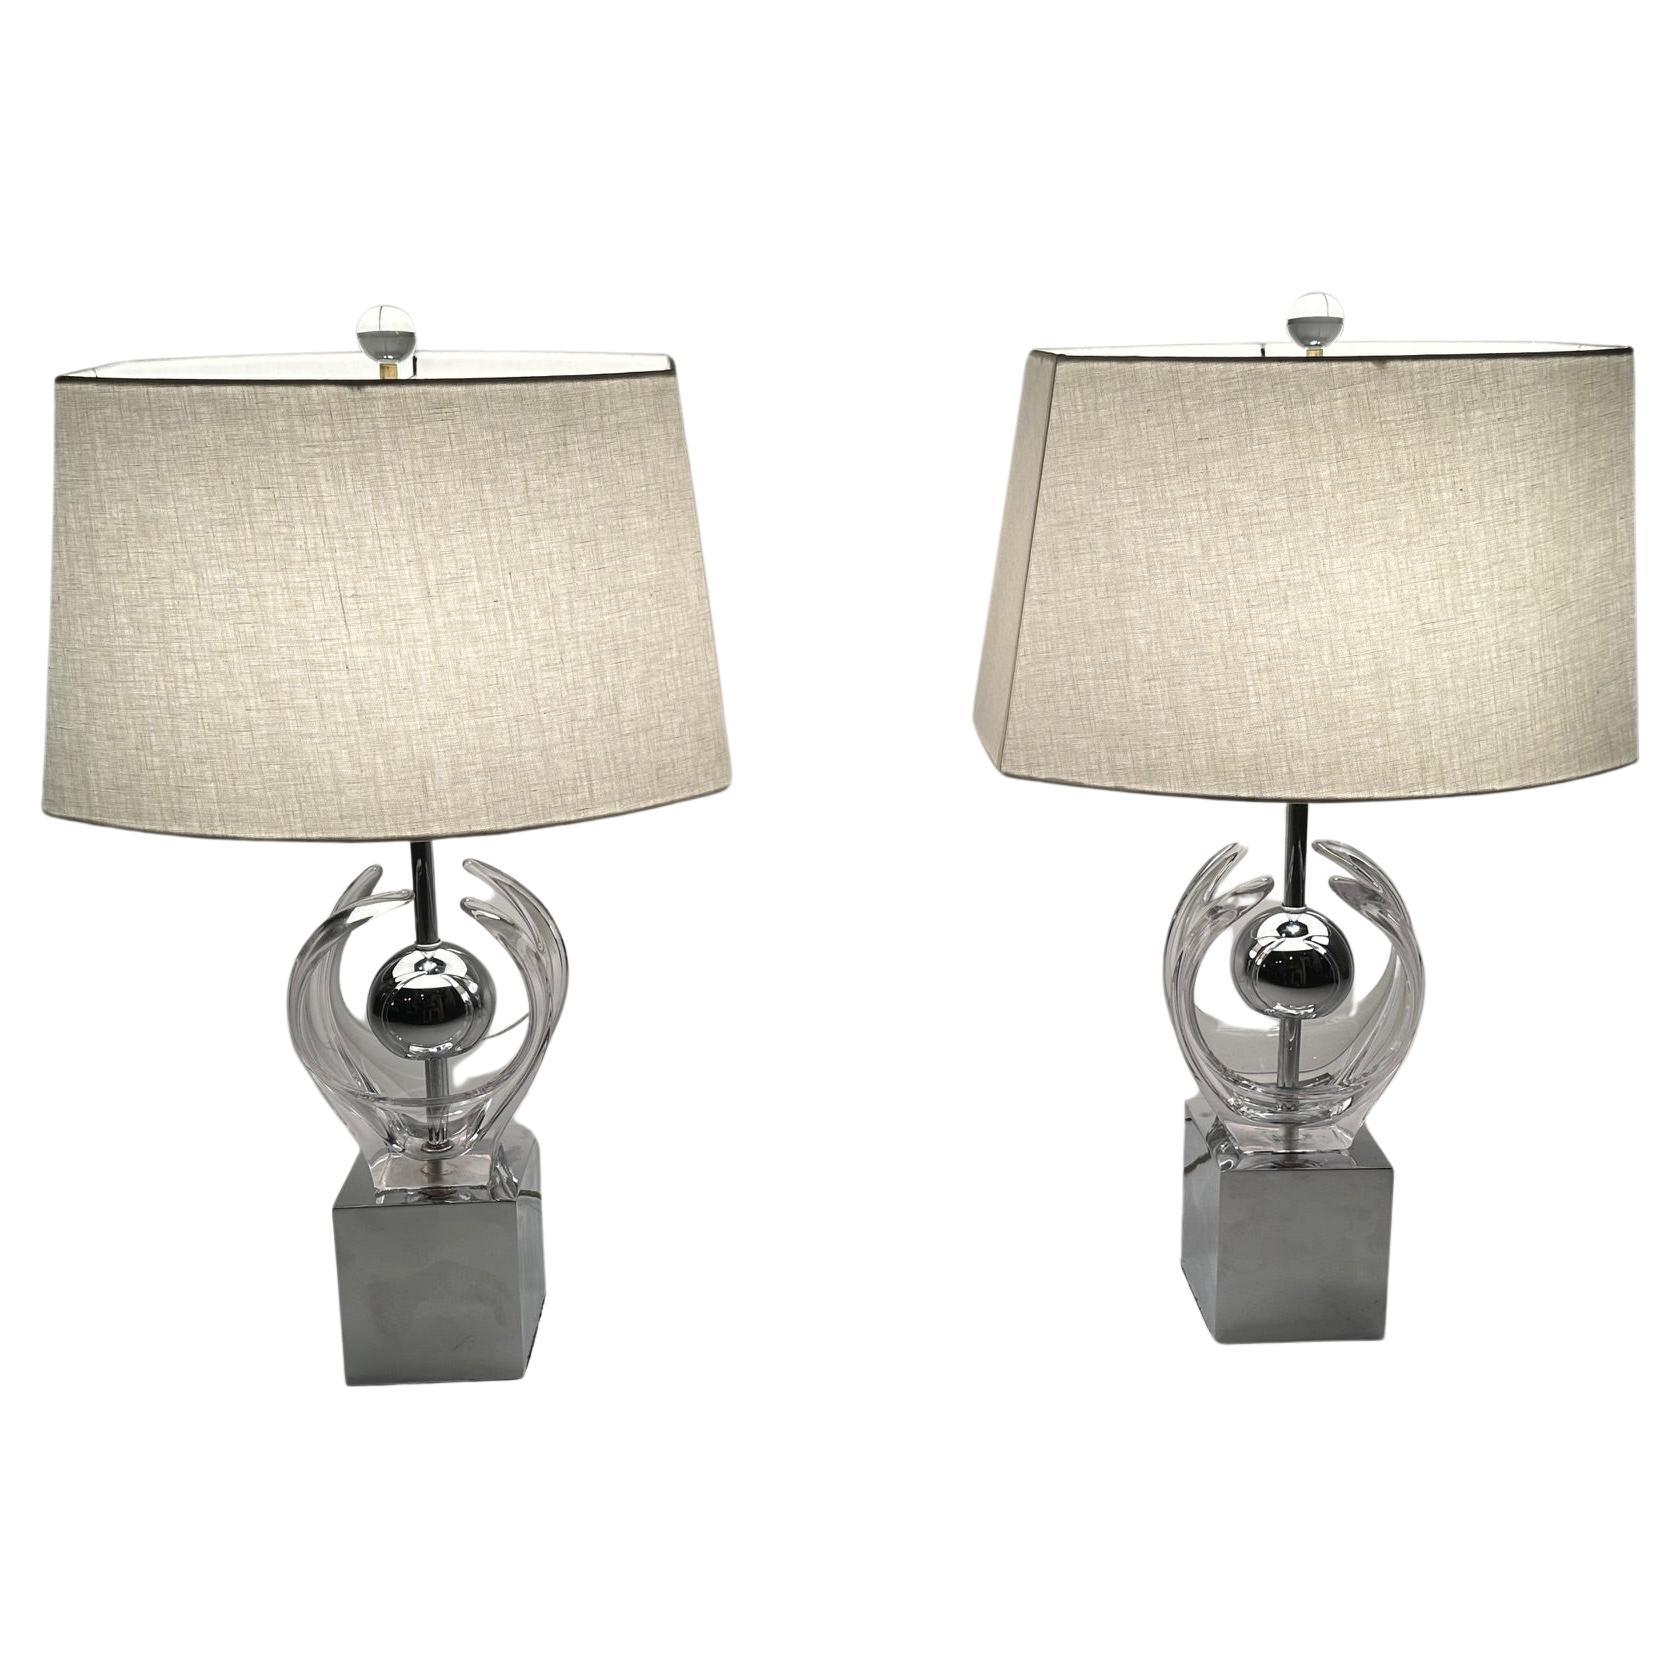 Striking Pair of Mid Century Modern Chrome & Glass Sculptural Table Lamps For Sale